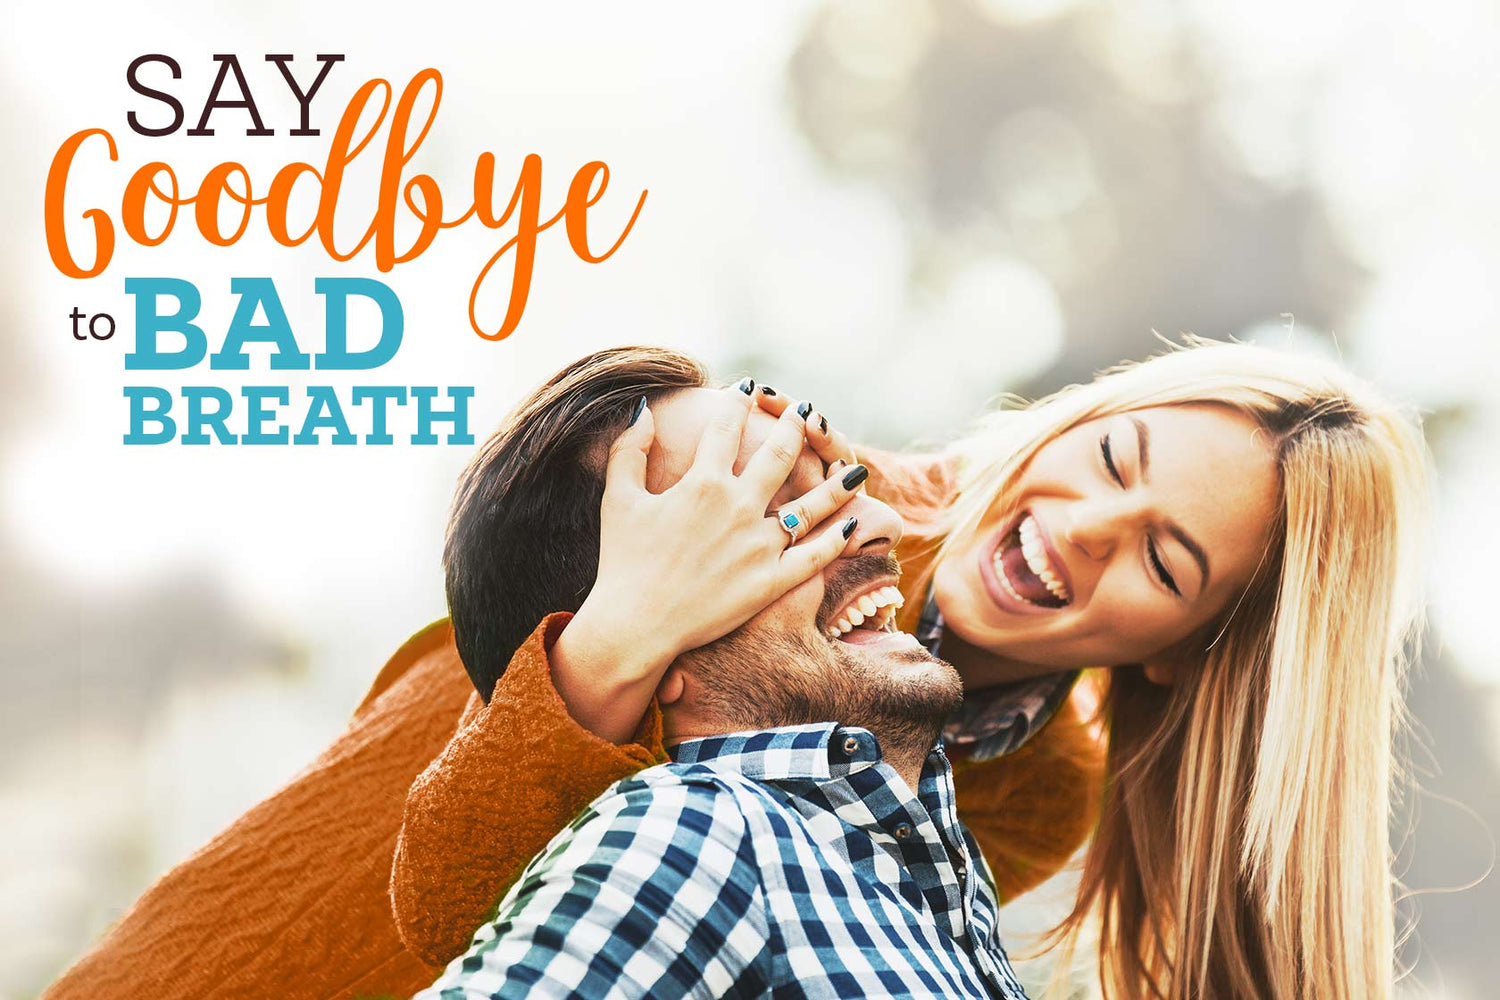 Oxyfresh - Have bad breath even after brushing say goodbye